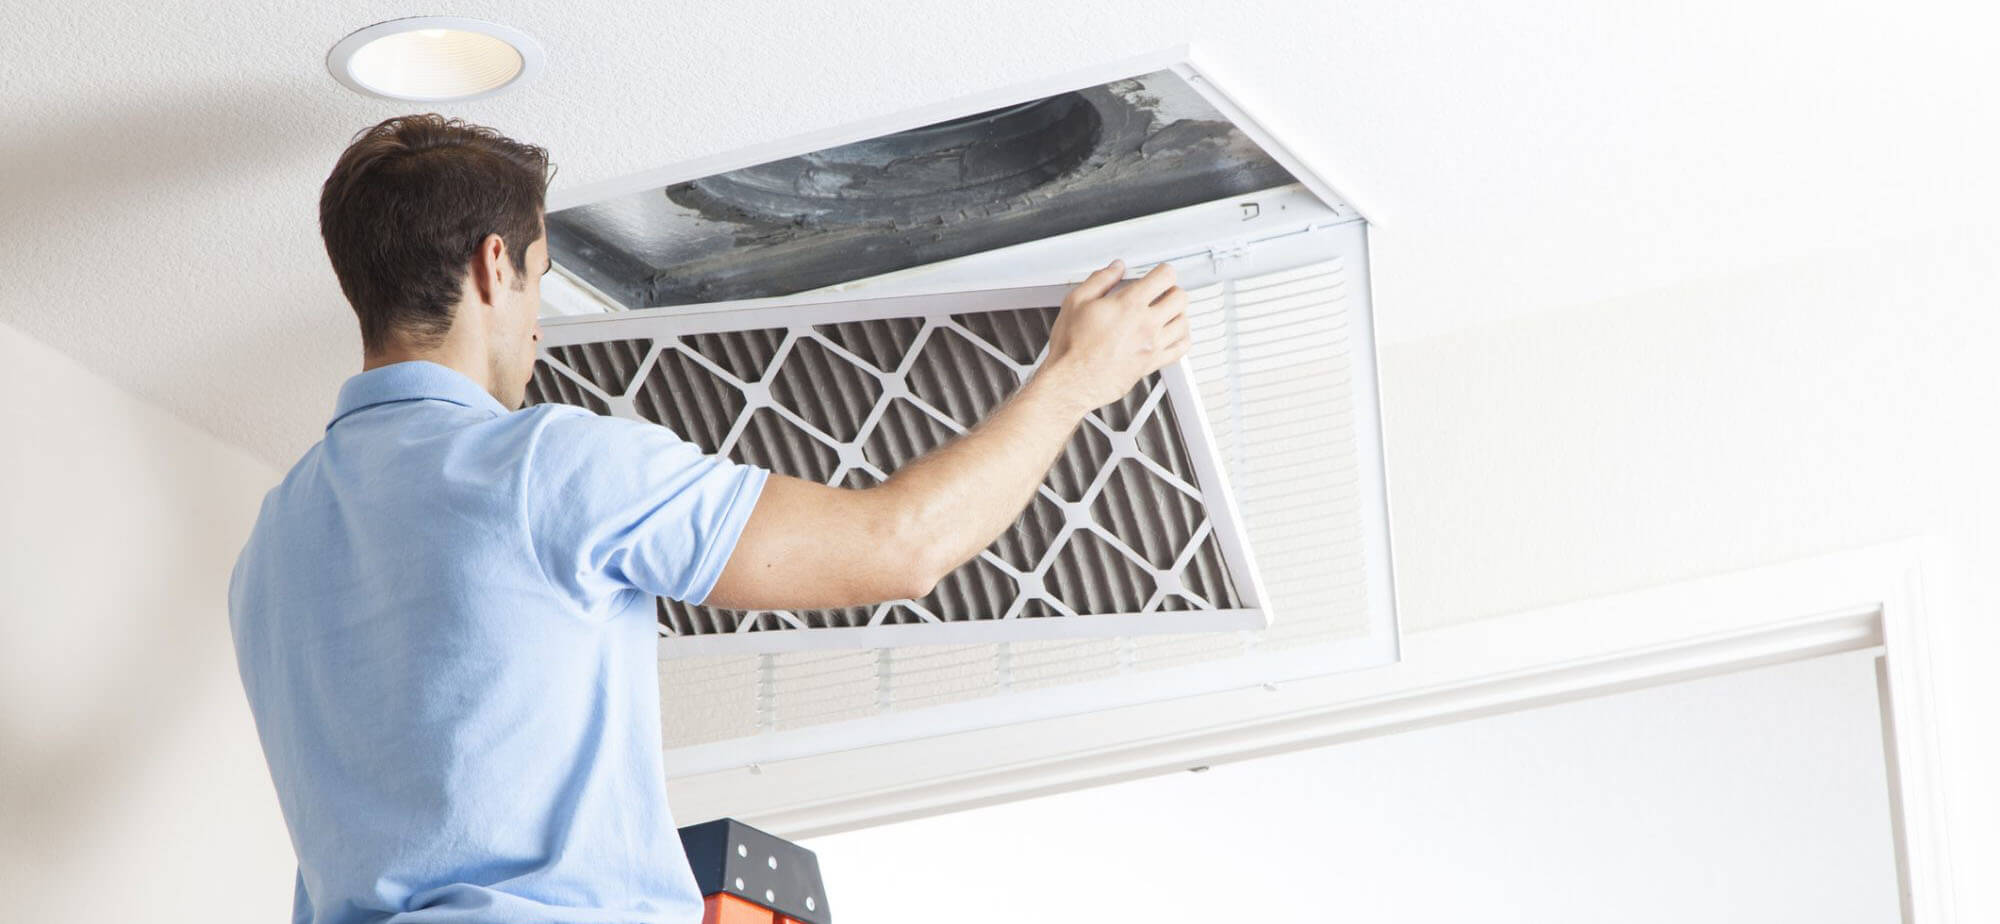 How Often Does Your HVAC Filter Need to be Changed?